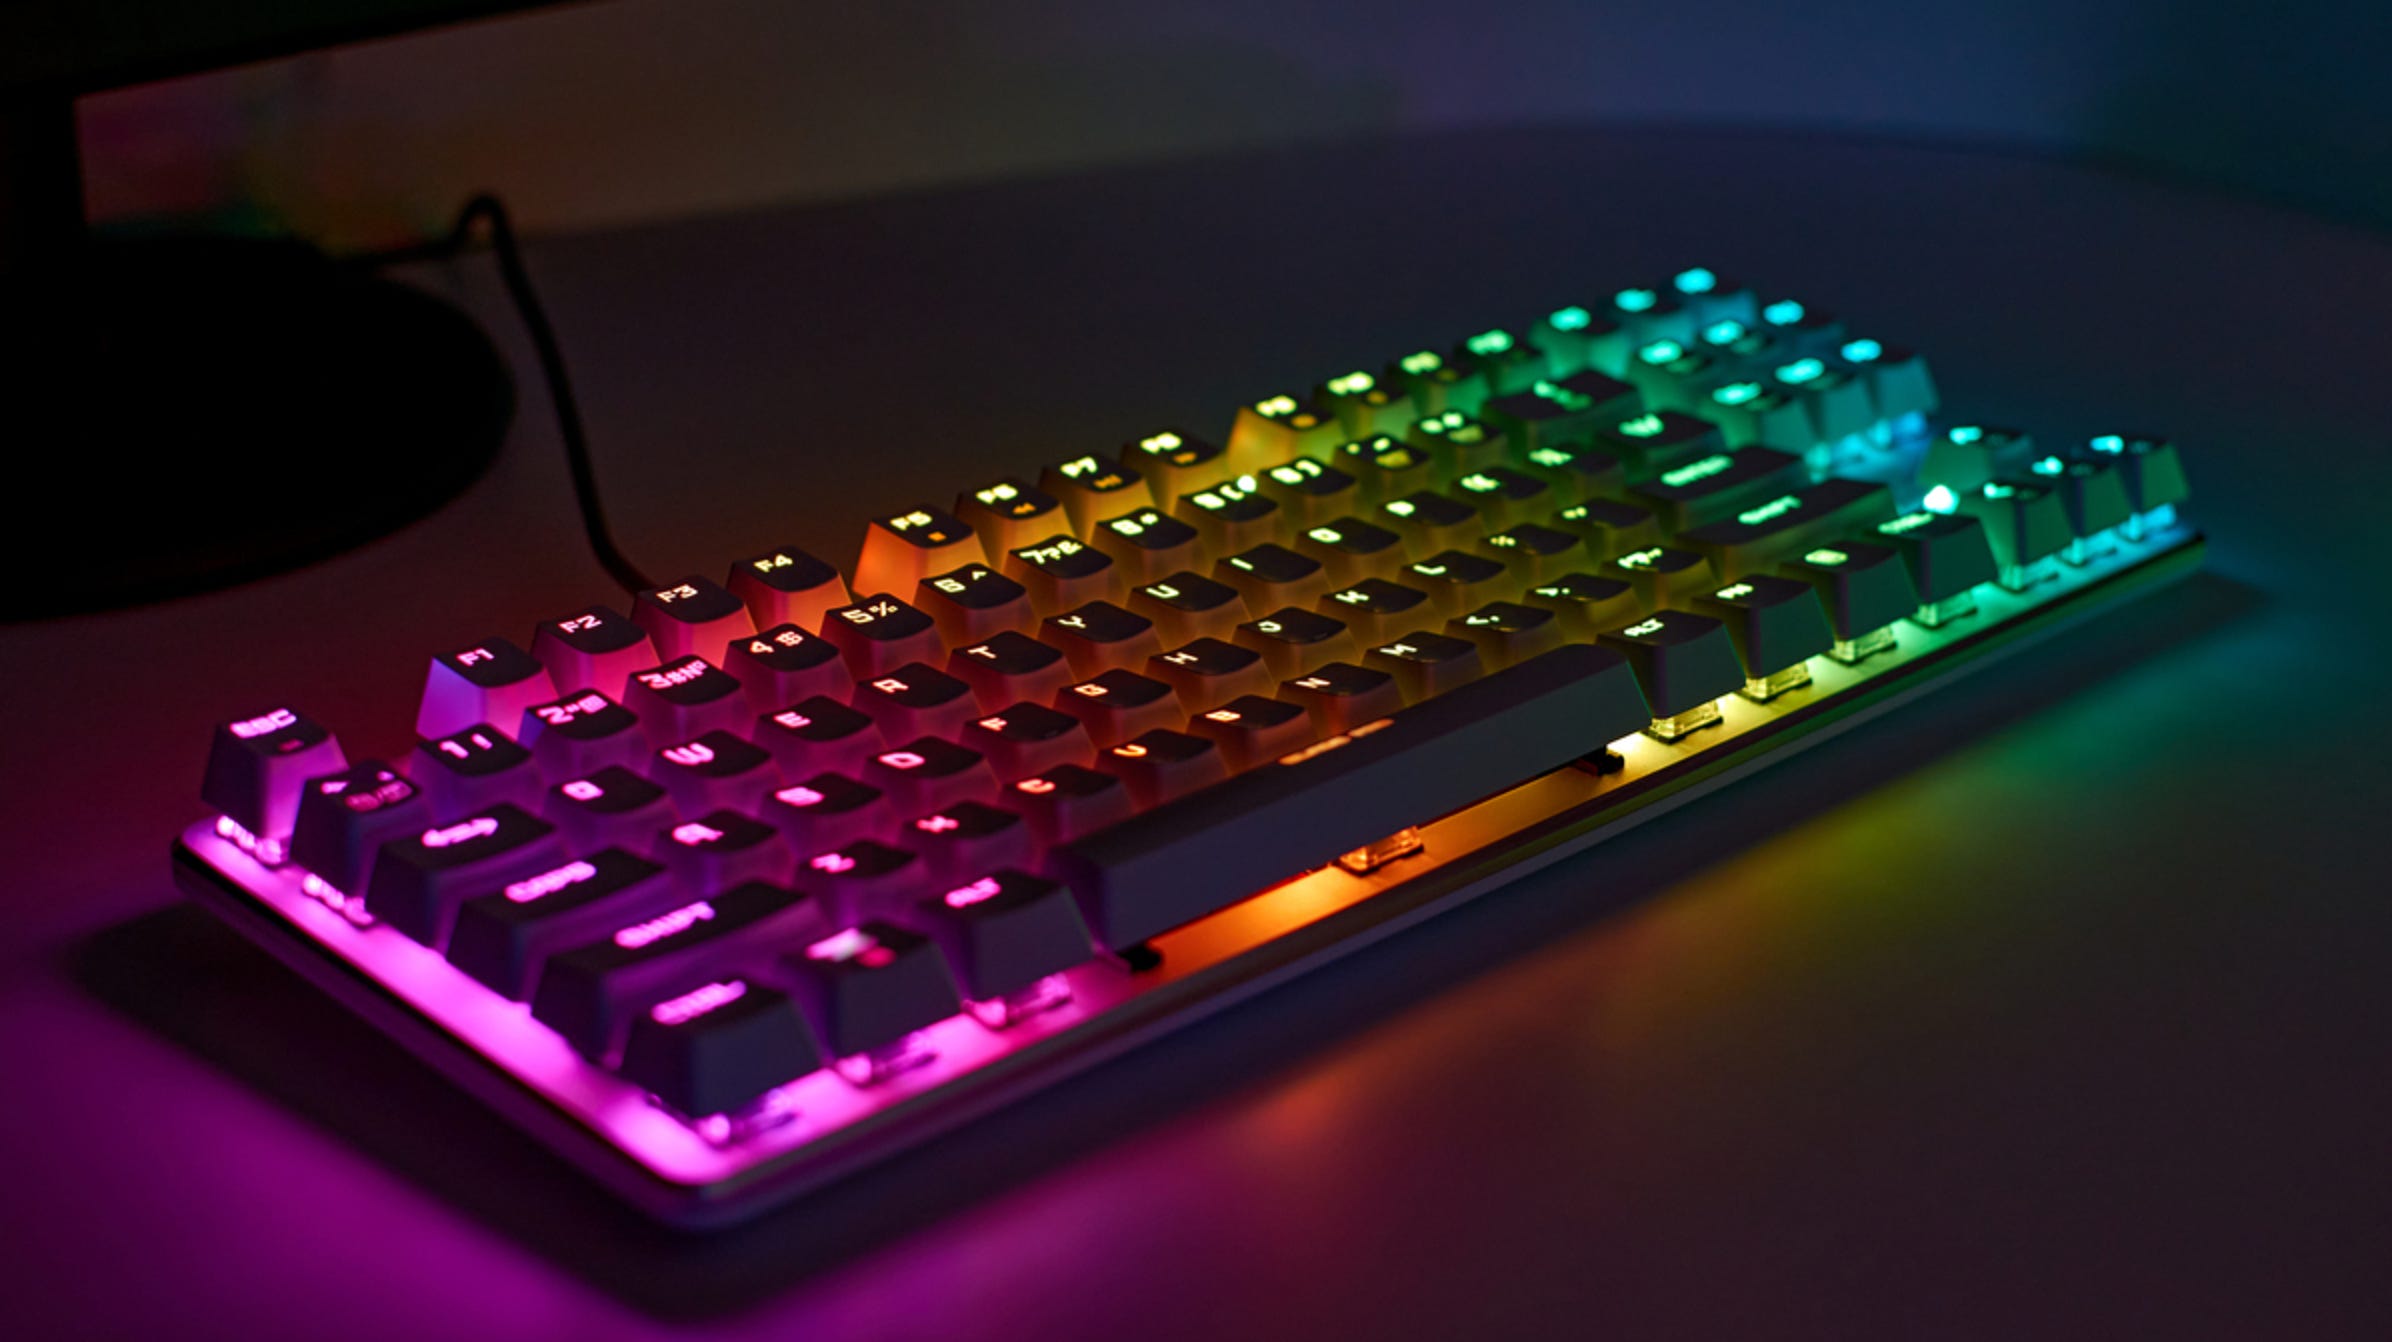 Gaming Keyboards vs. Keyboards: What’s the Difference?